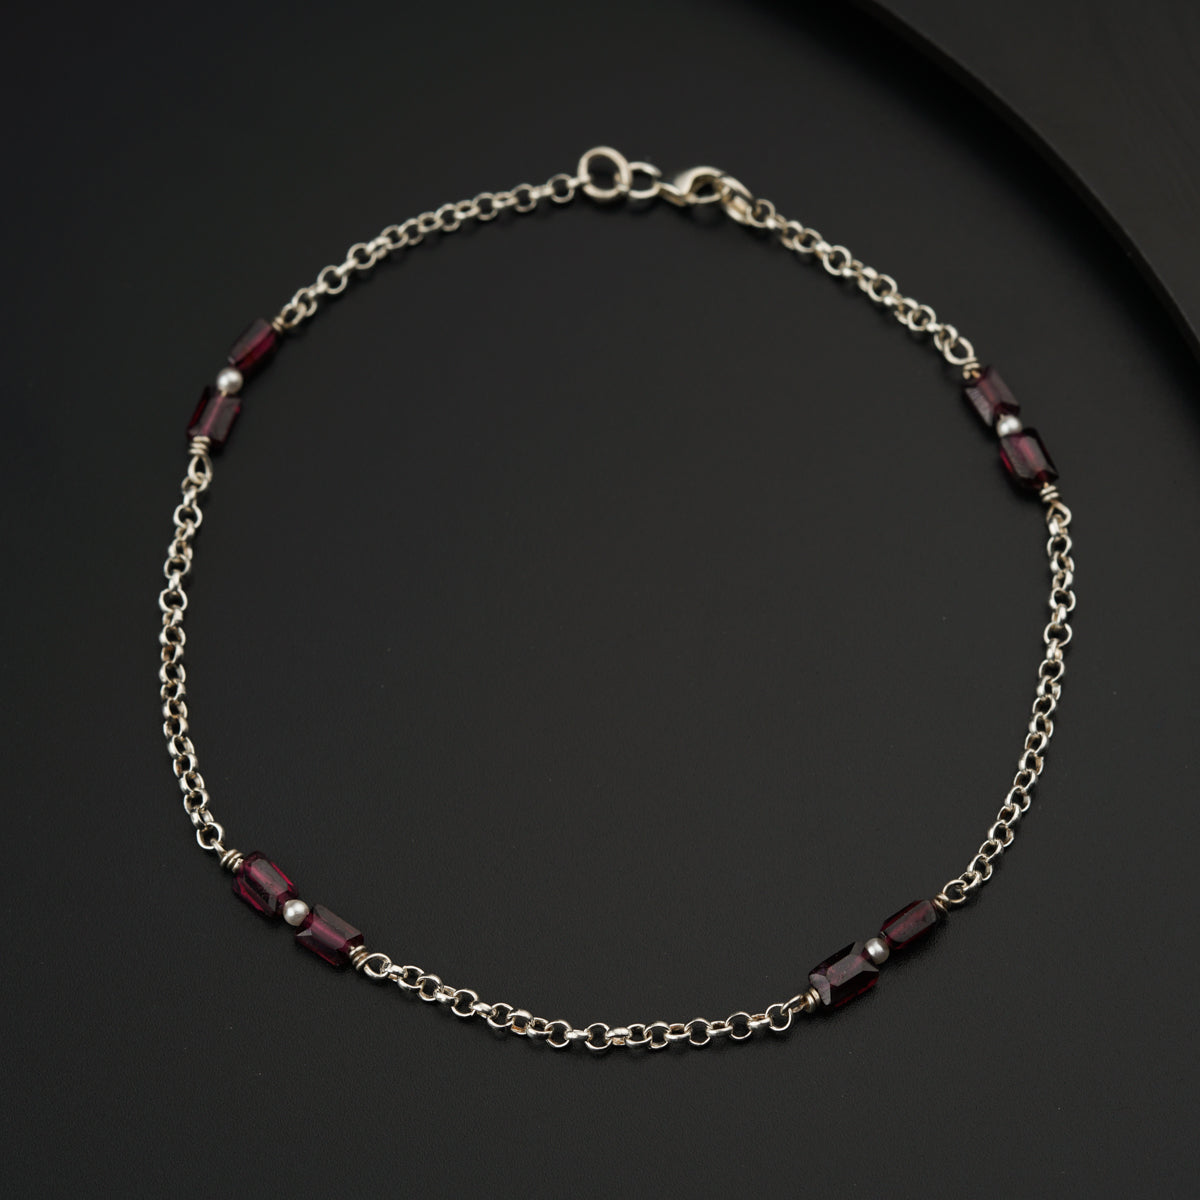 a silver chain with a red bead on it